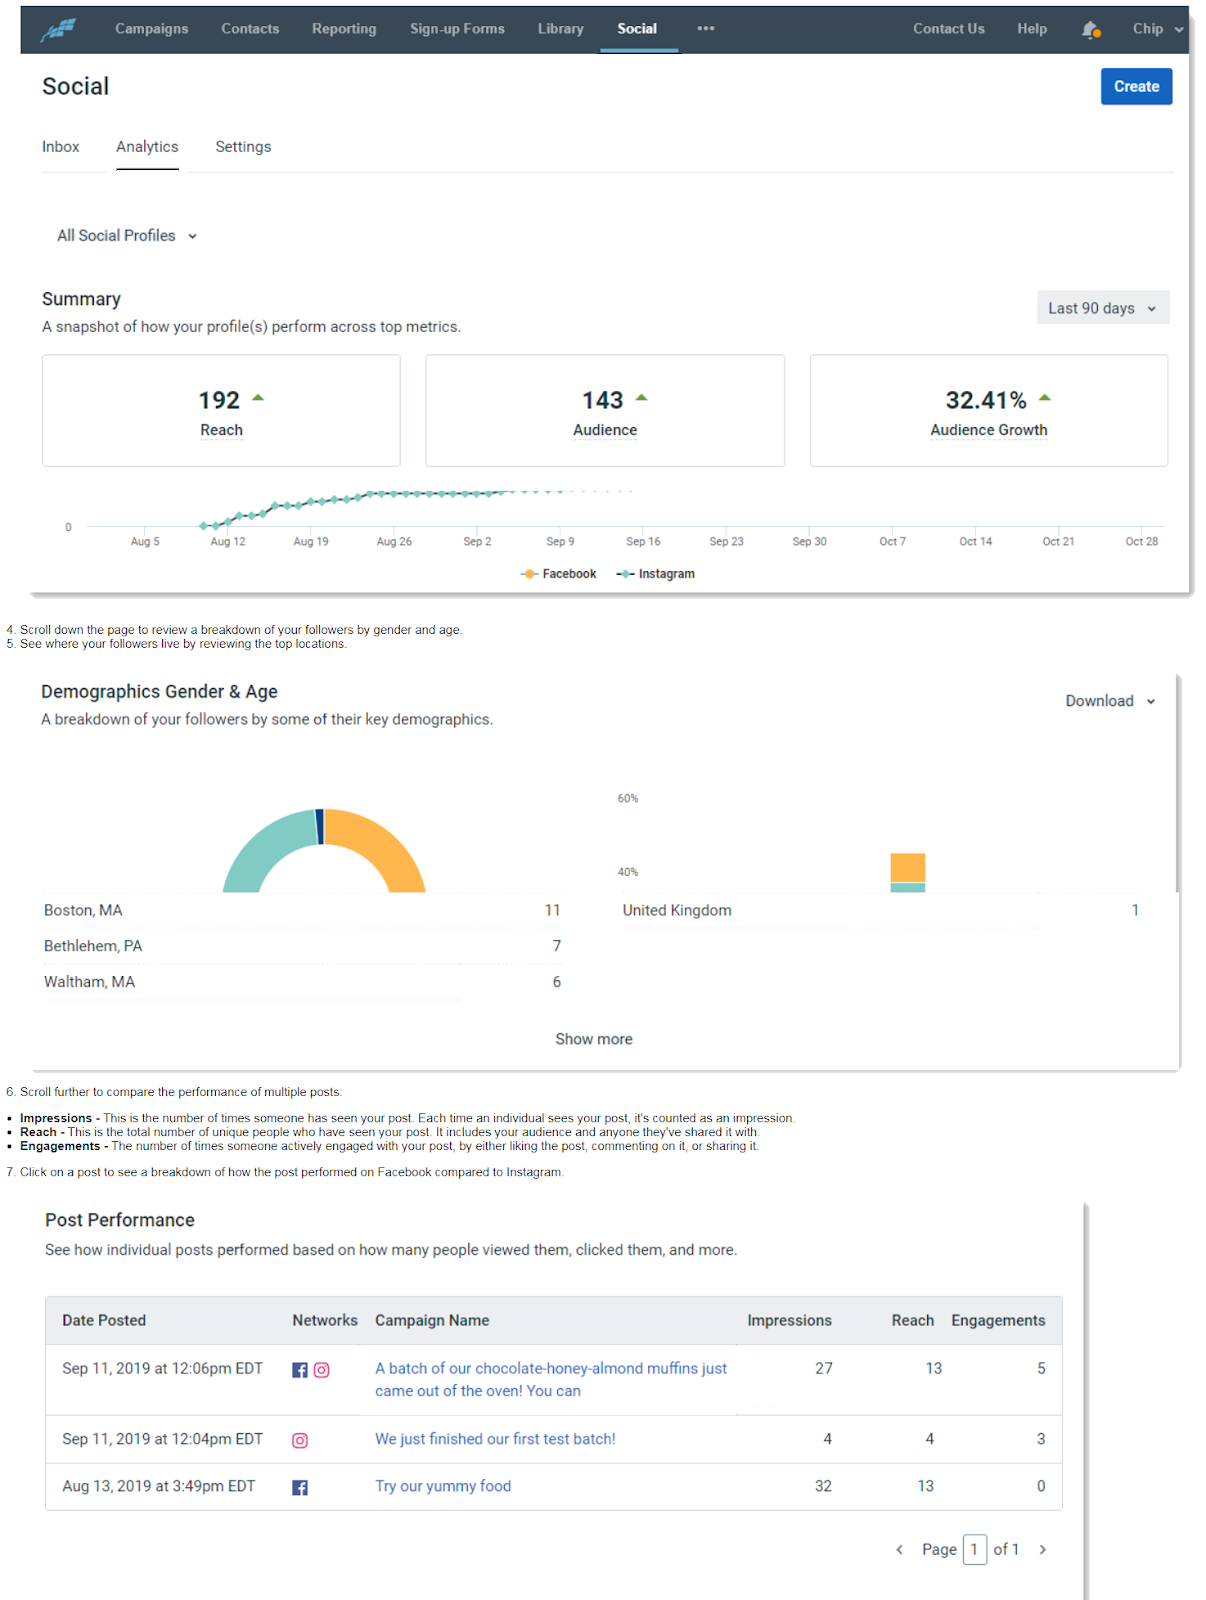 How to Measure Social Media Performance